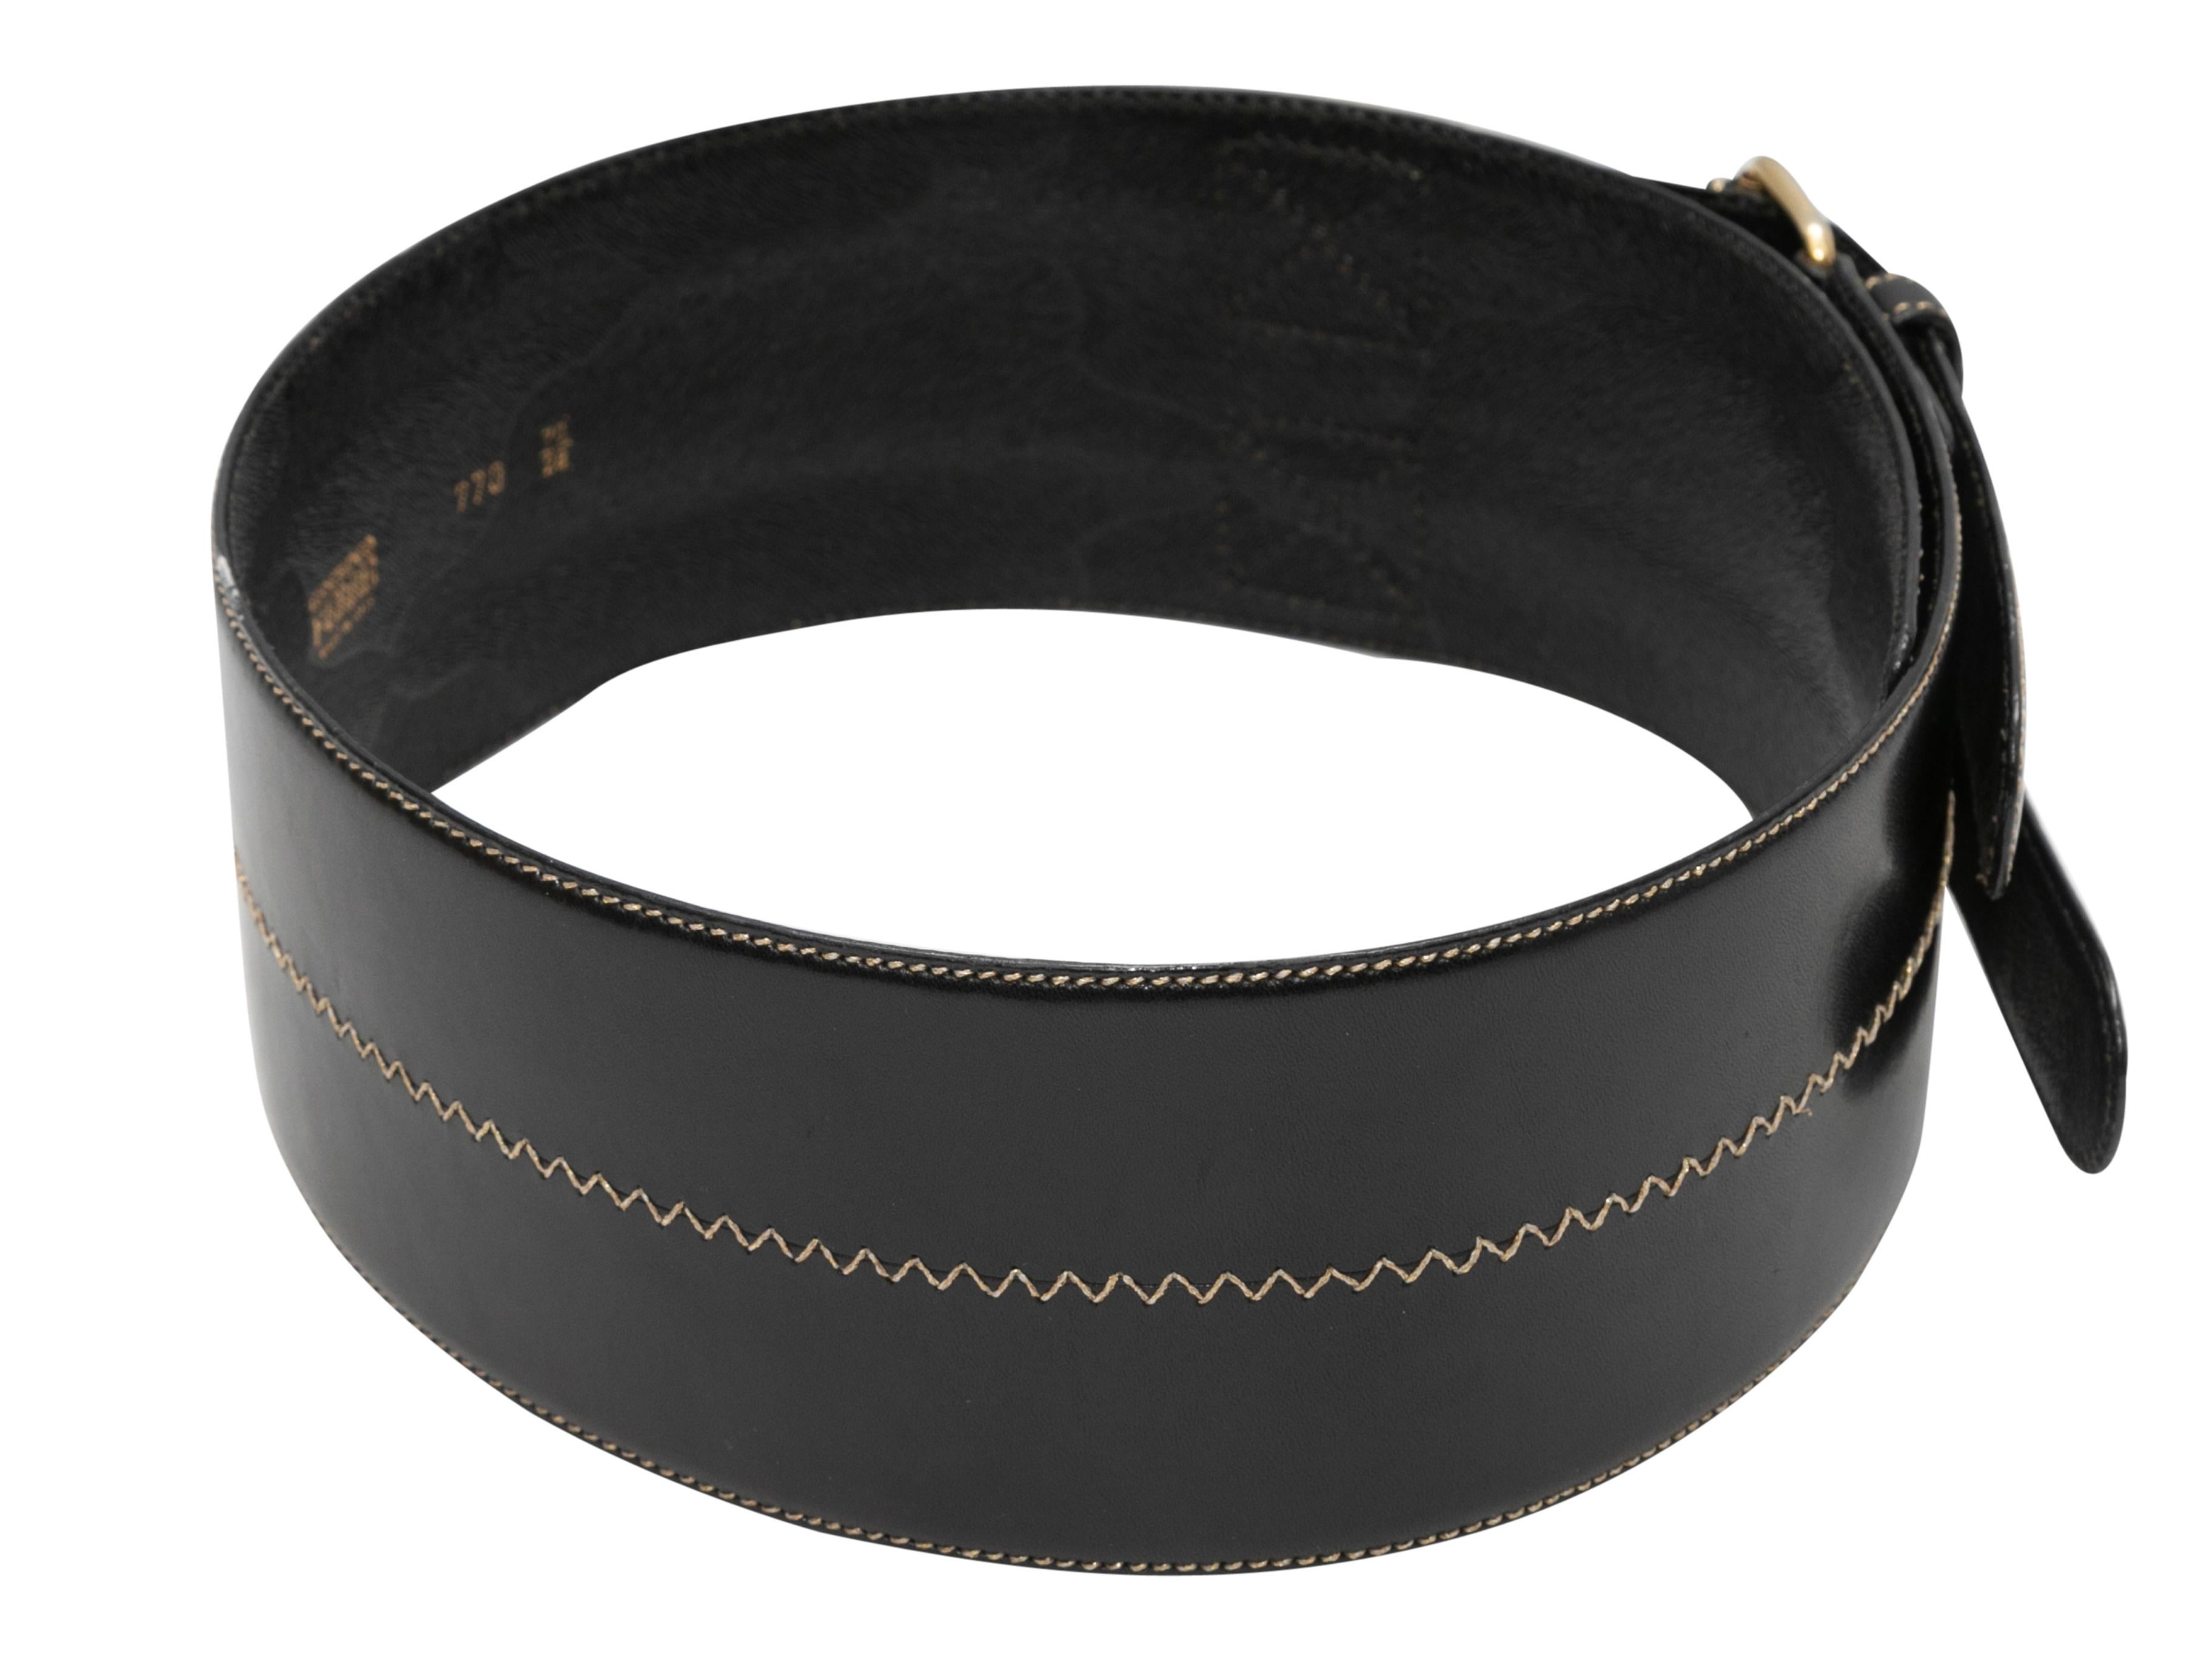 Vintage black wide leather belt by Gianfranco Ferre. Contrast stitching throughout. Dual gold-tone buckle closures. 3